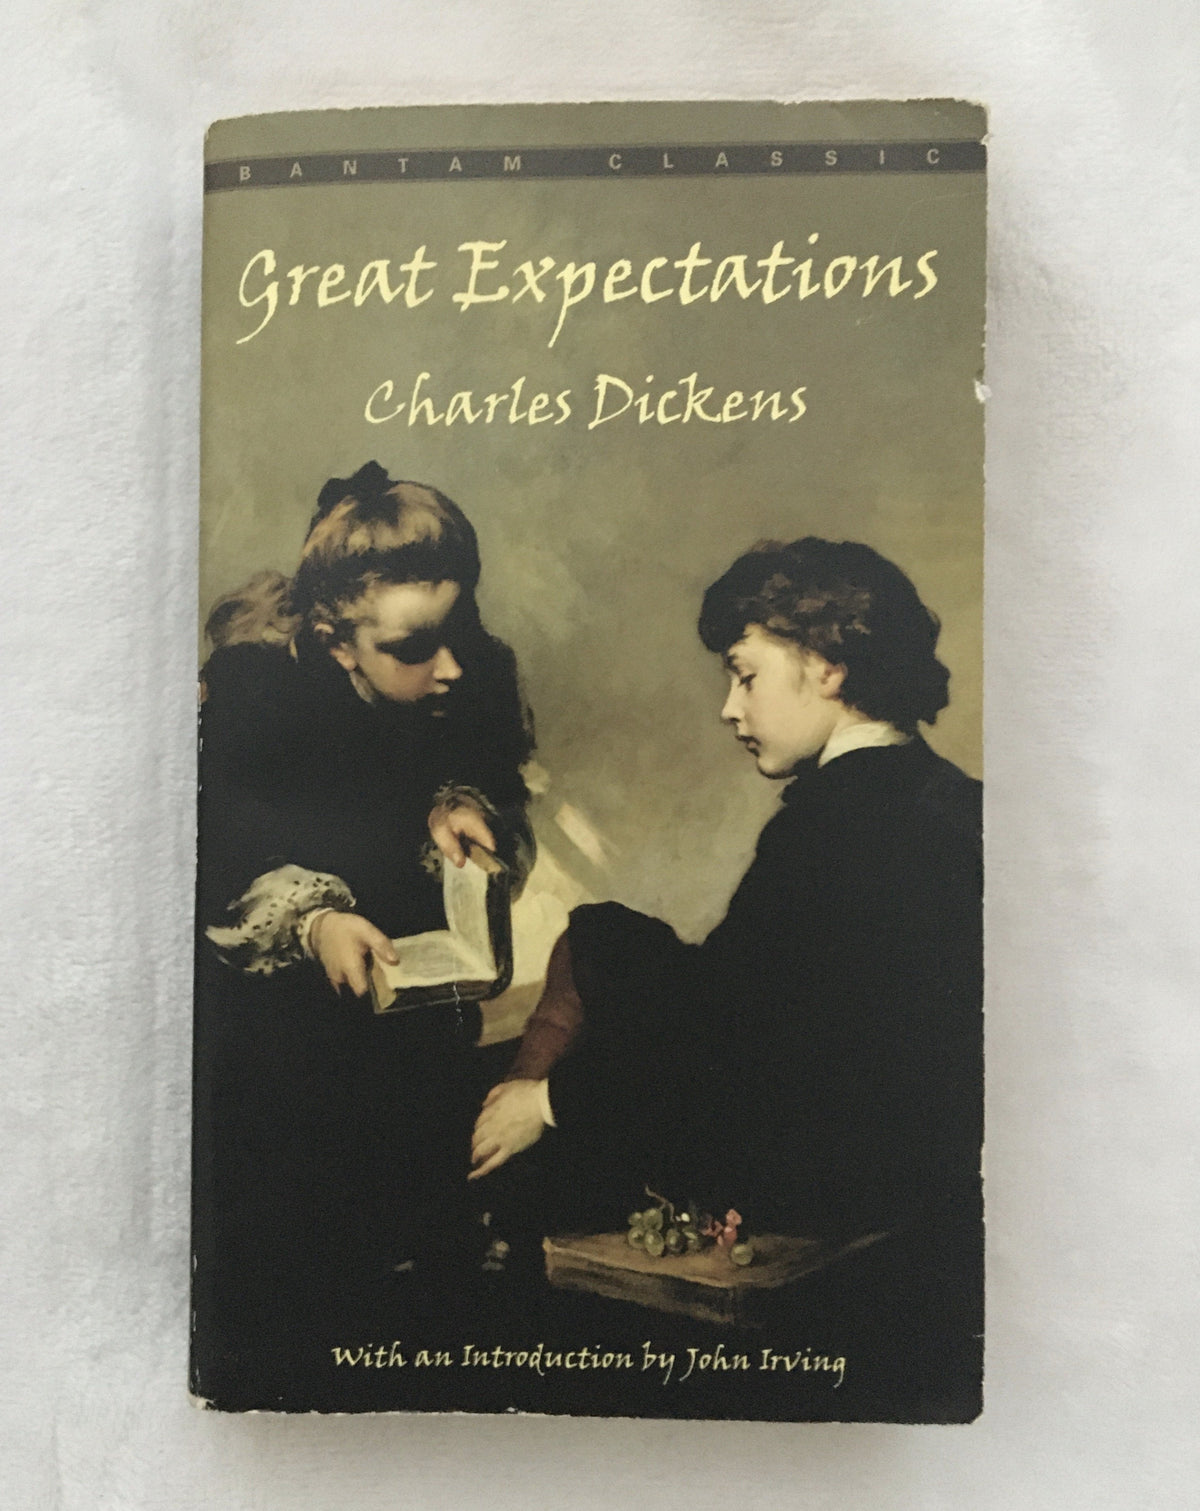 Great Expectations by Charles Dickens, book, Ten Dollar Books, Ten Dollar Books